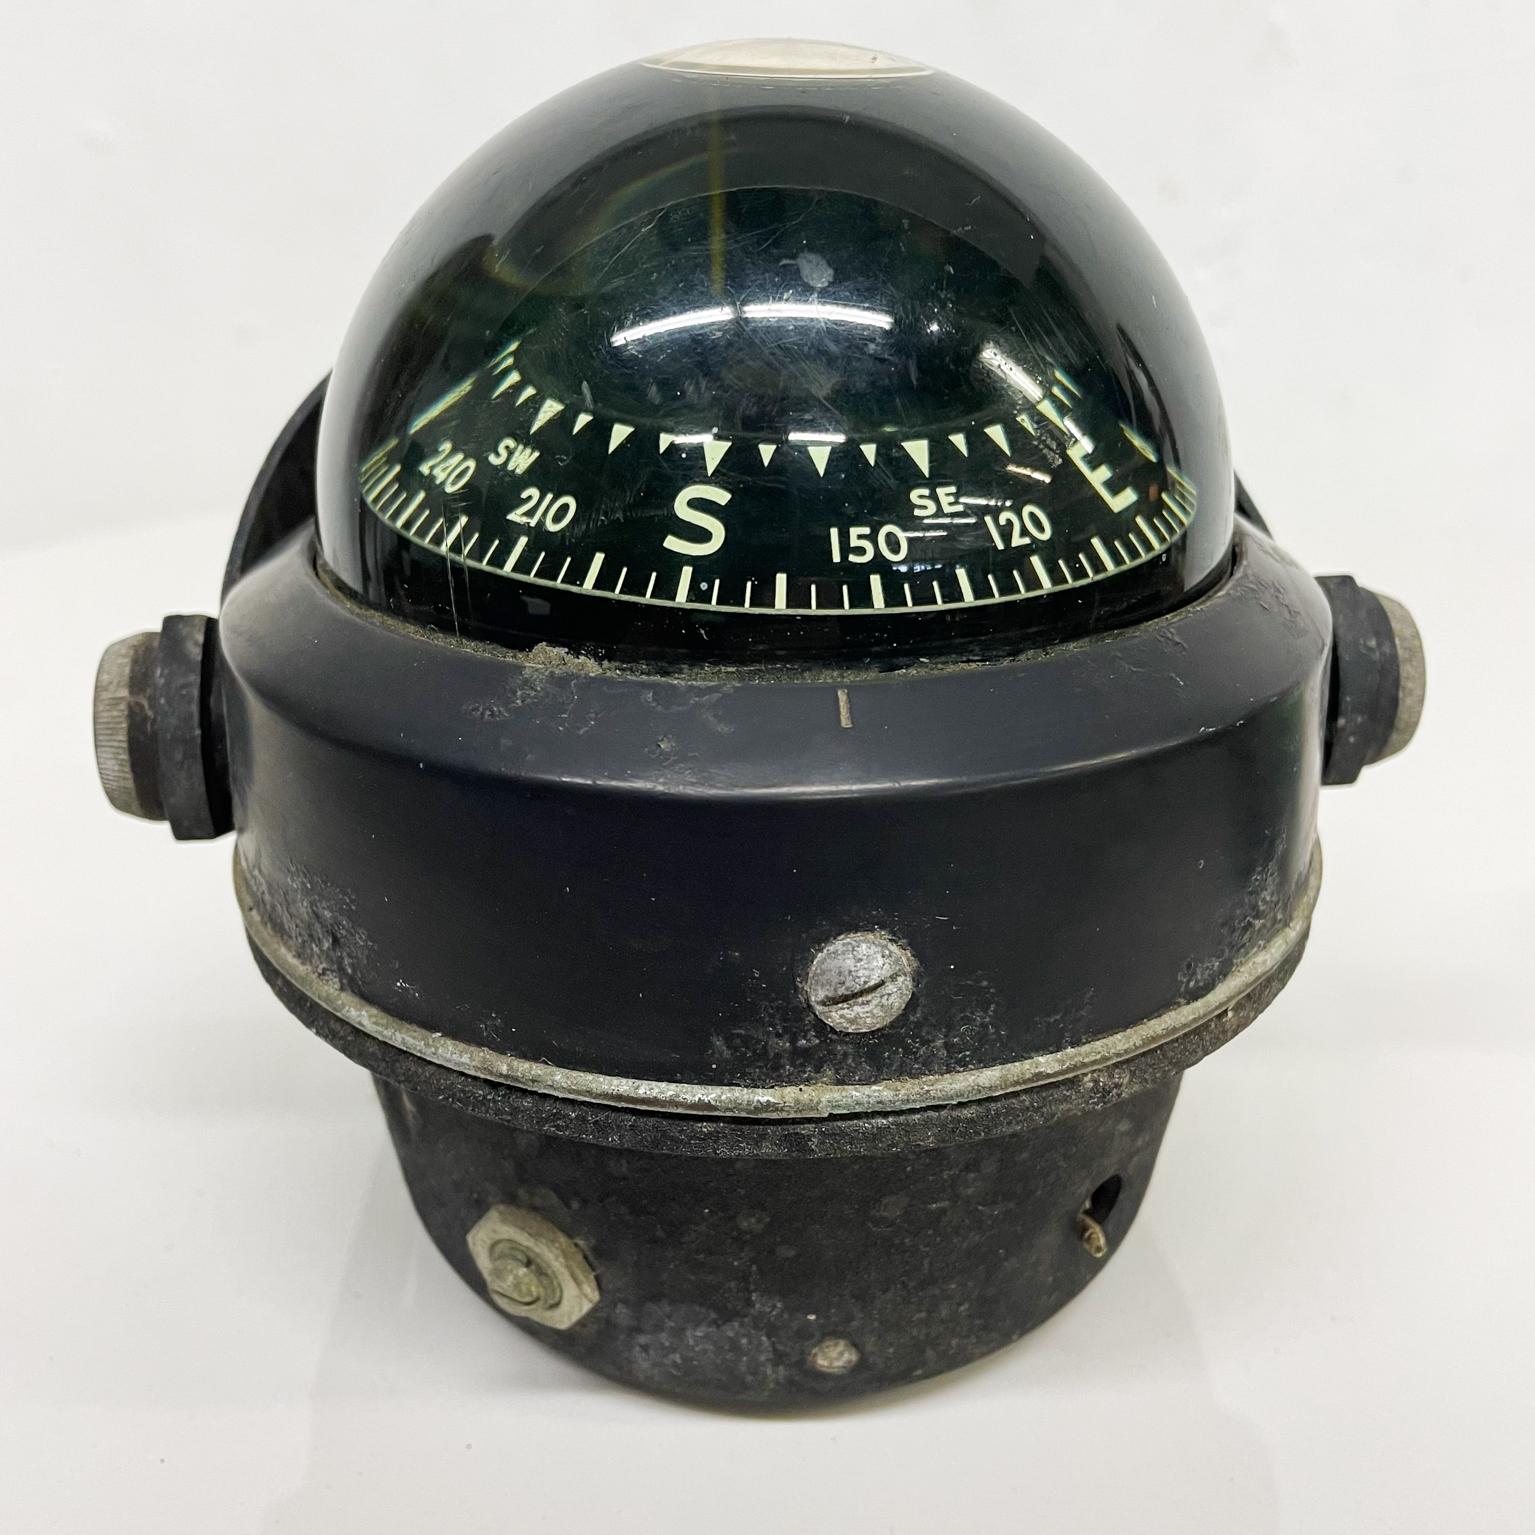 airguide compass